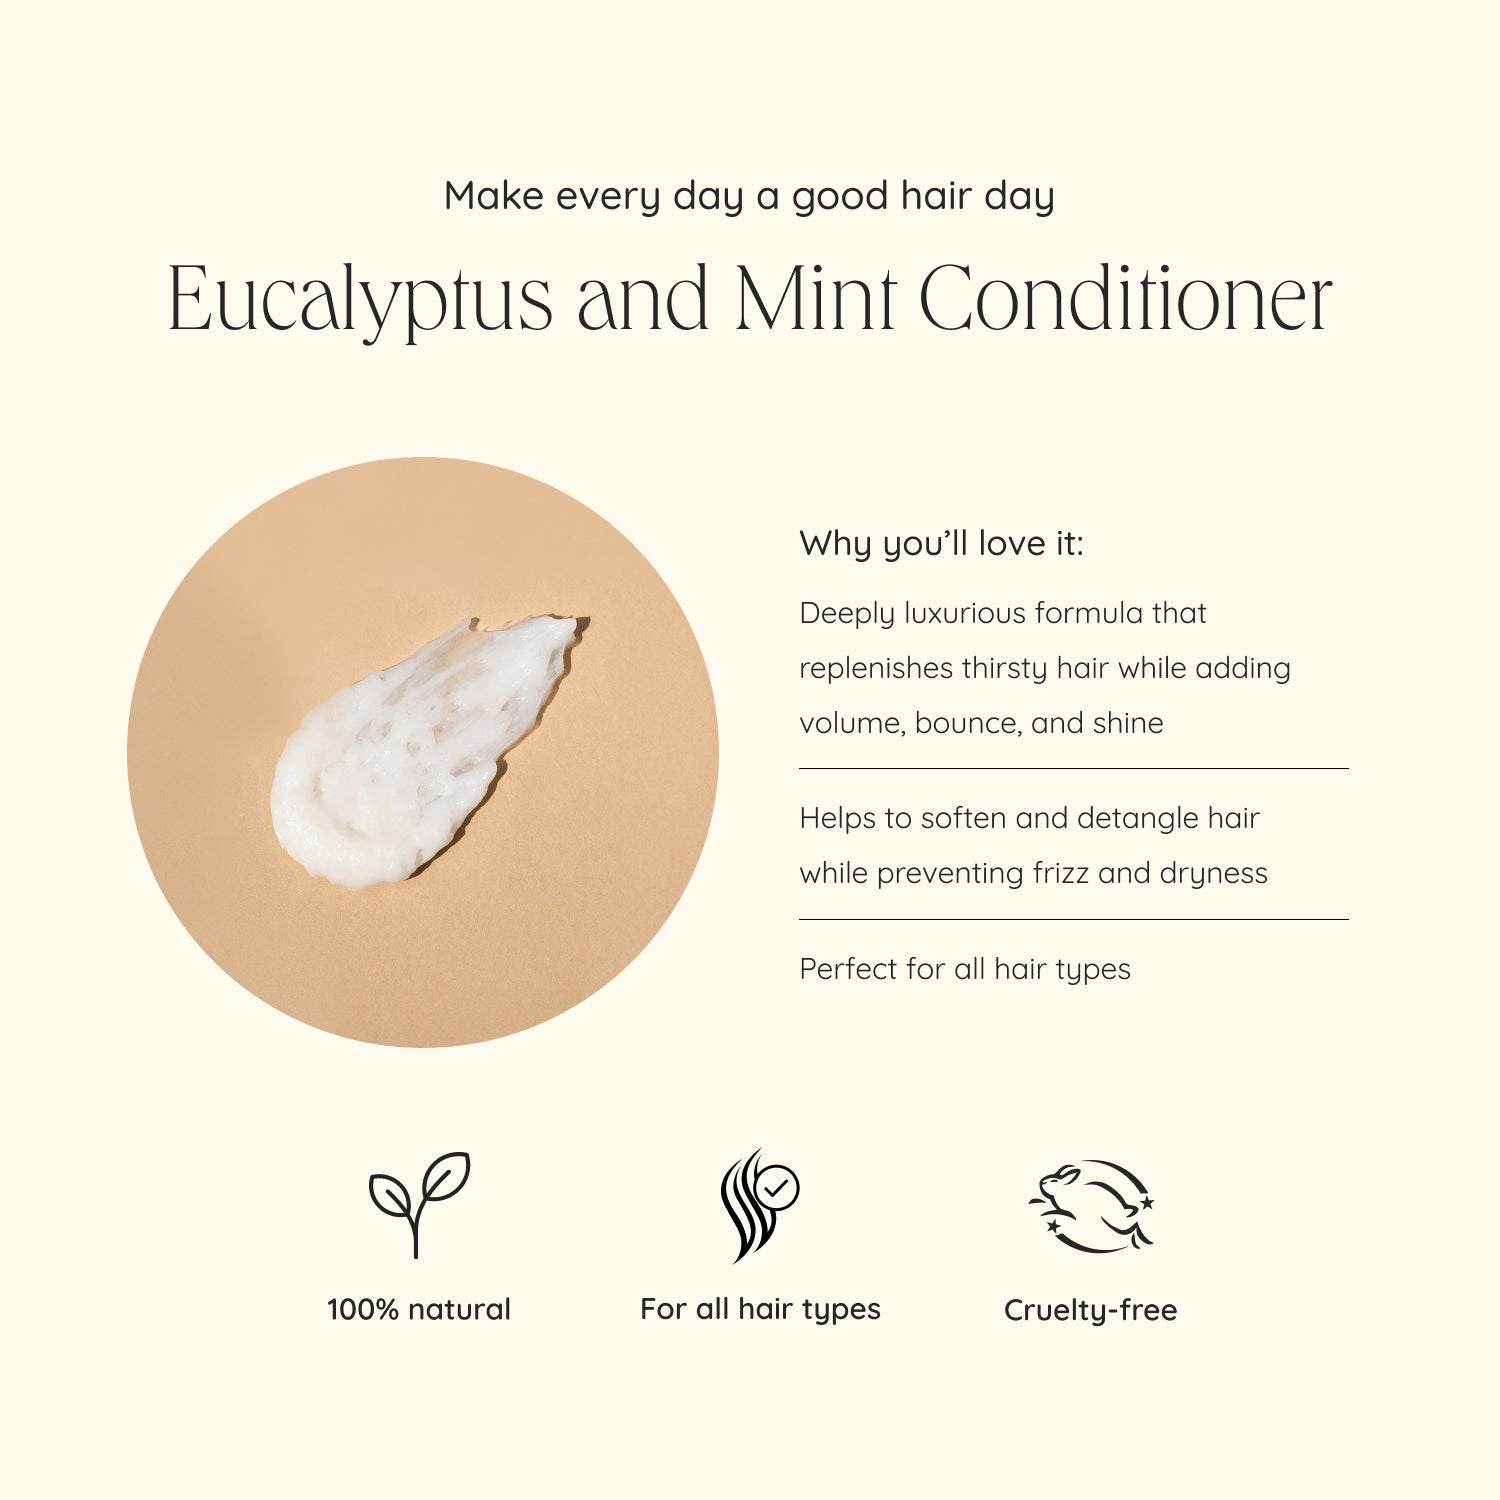 files/conditioner-product-overview.jpg